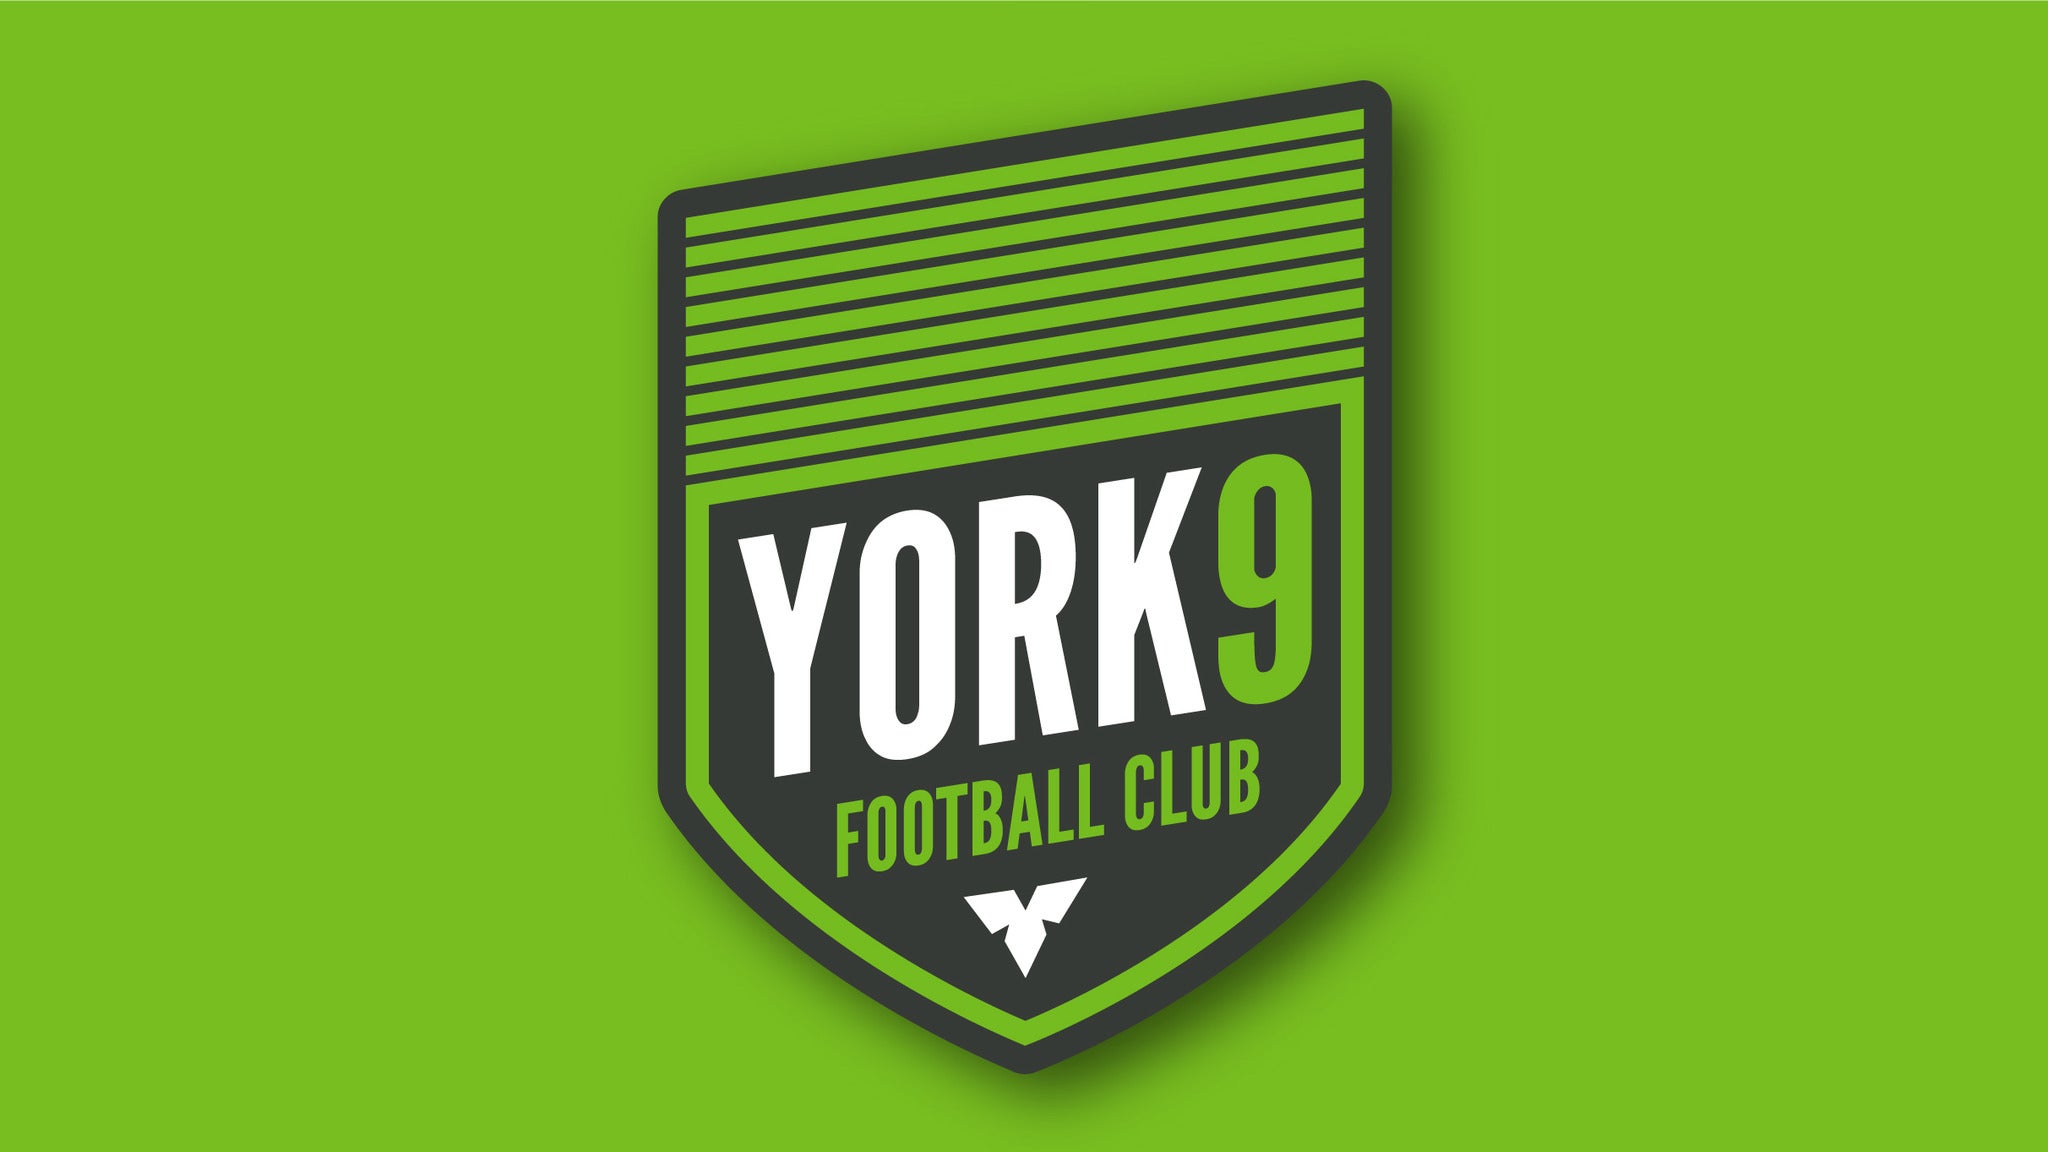 York9 FC vs. HFX Wanderers FC in Toronto promo photo for Special  presale offer code